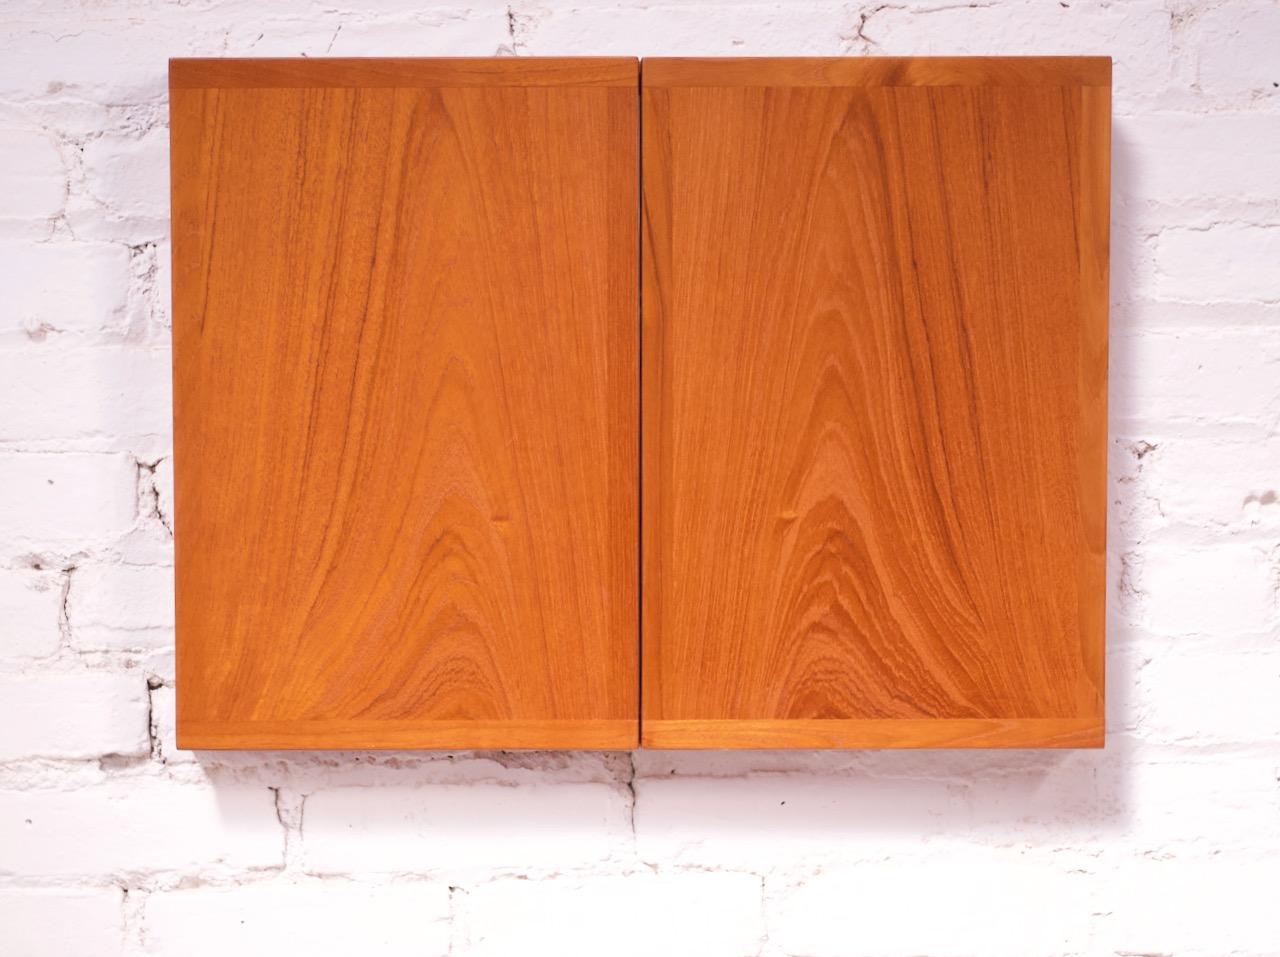 Folding triptych tabletop or wall-mounted mirror crafted in teak designed by Kai Kristiansen for Aksel Kjersgaard (circa 1960s, Denmark) composed of three hinged-sections (the two end sections can fold in partially or fully). Equipped with brackets,